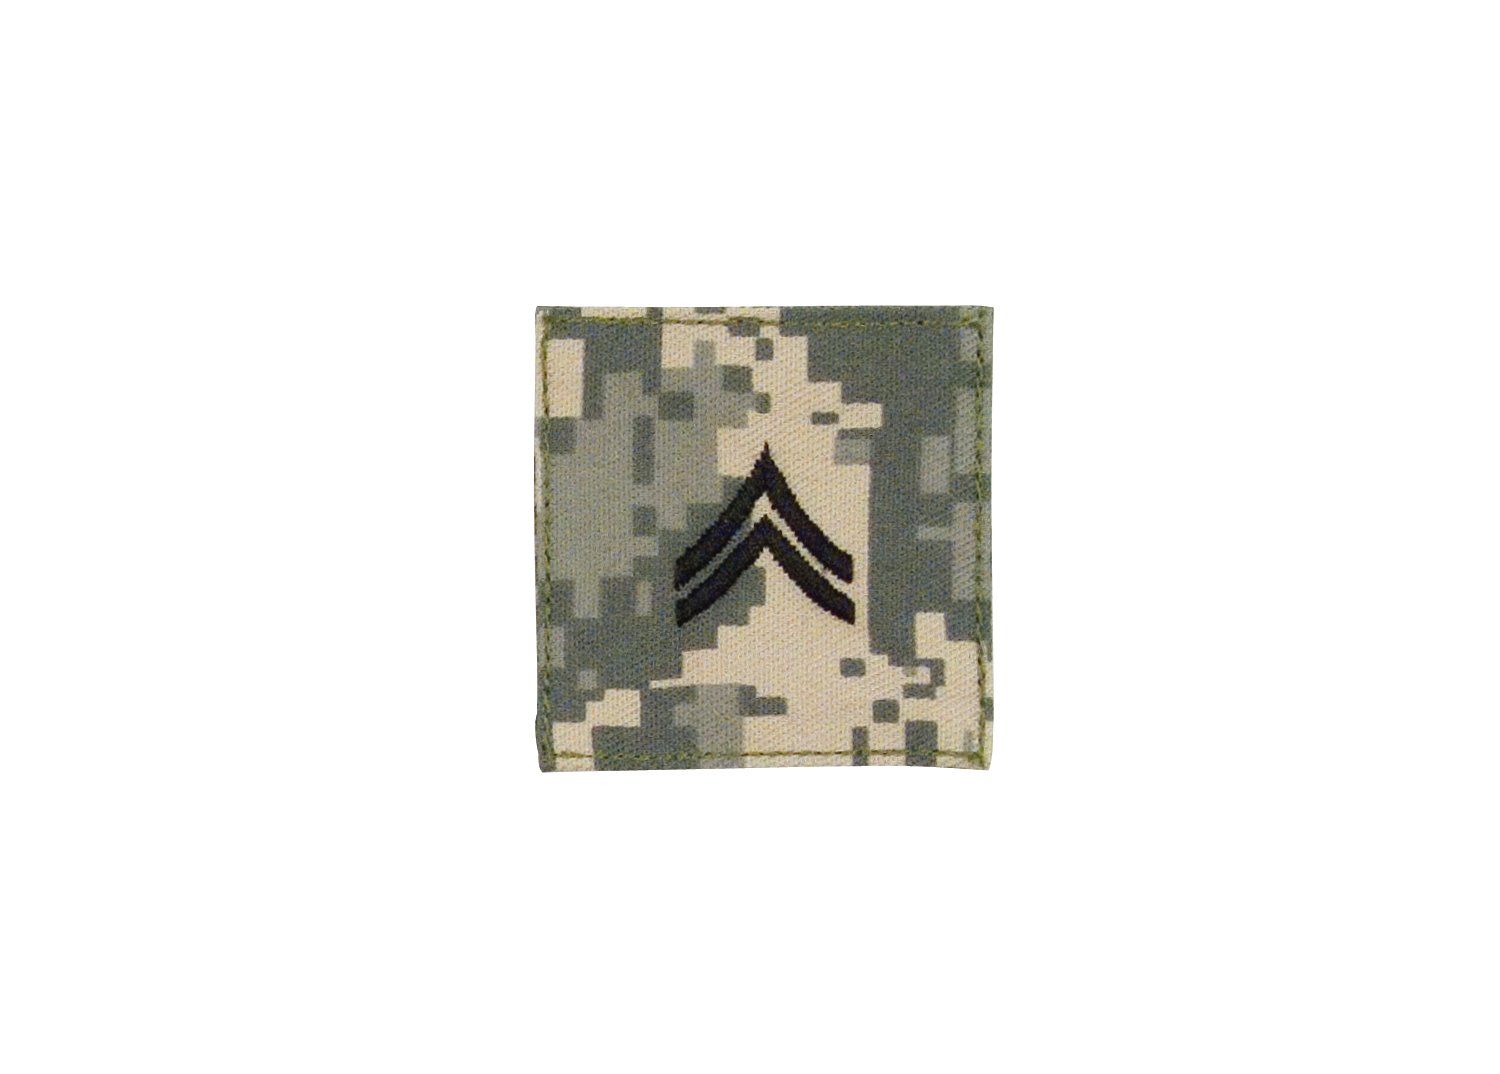 Official U.S. Made Embroidered Rank Insignia - Corporal